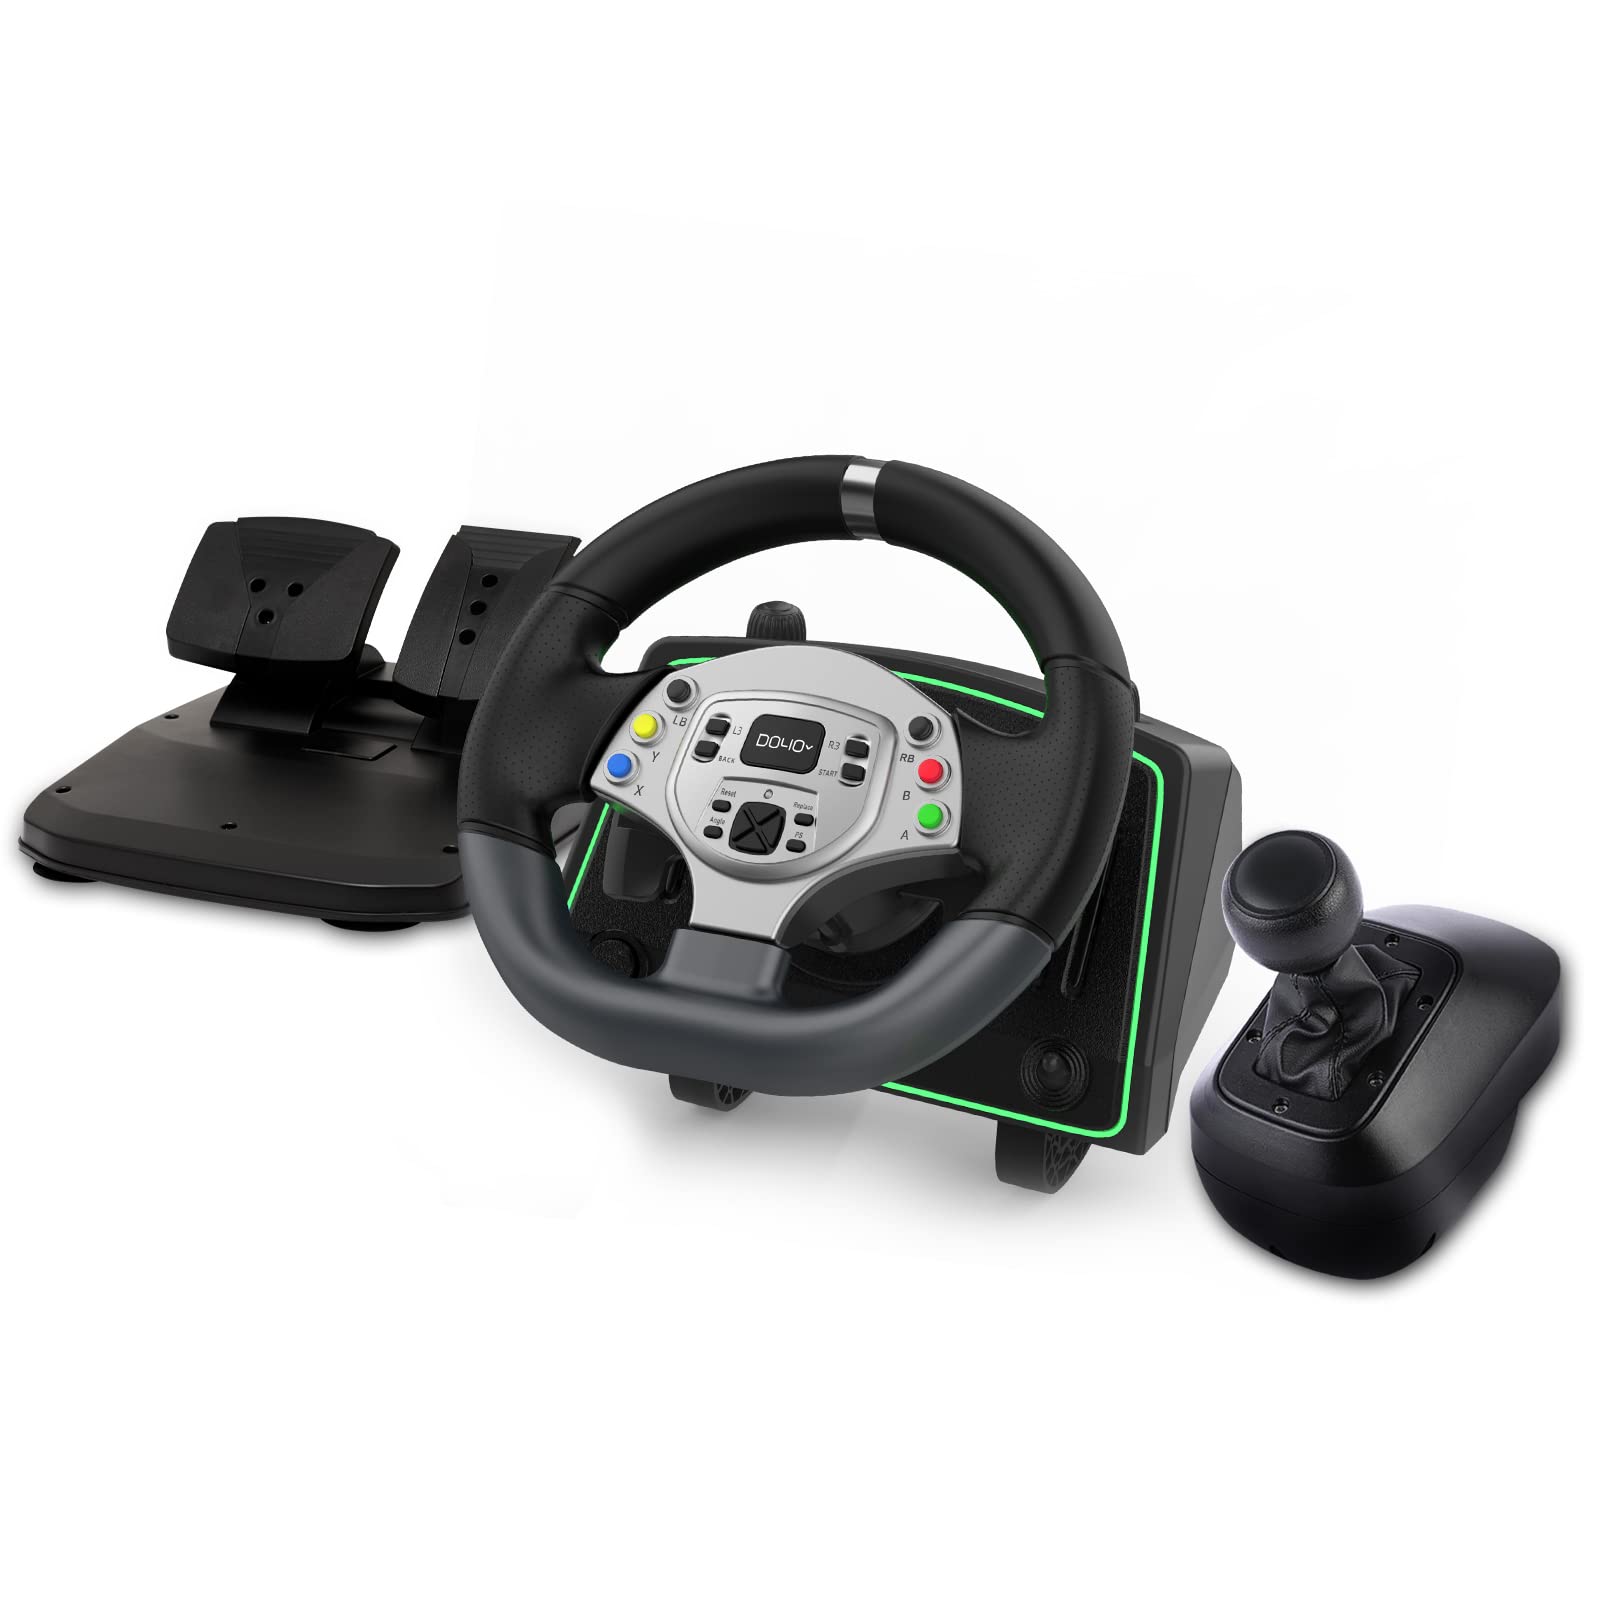 NBCP Racing Wheel, Gaming Steering Wheels Driving Sim Car Simulator 270° Pro Volante PC Pedals Paddle Gear Shifters for PC, PS3, Switch, Android TV